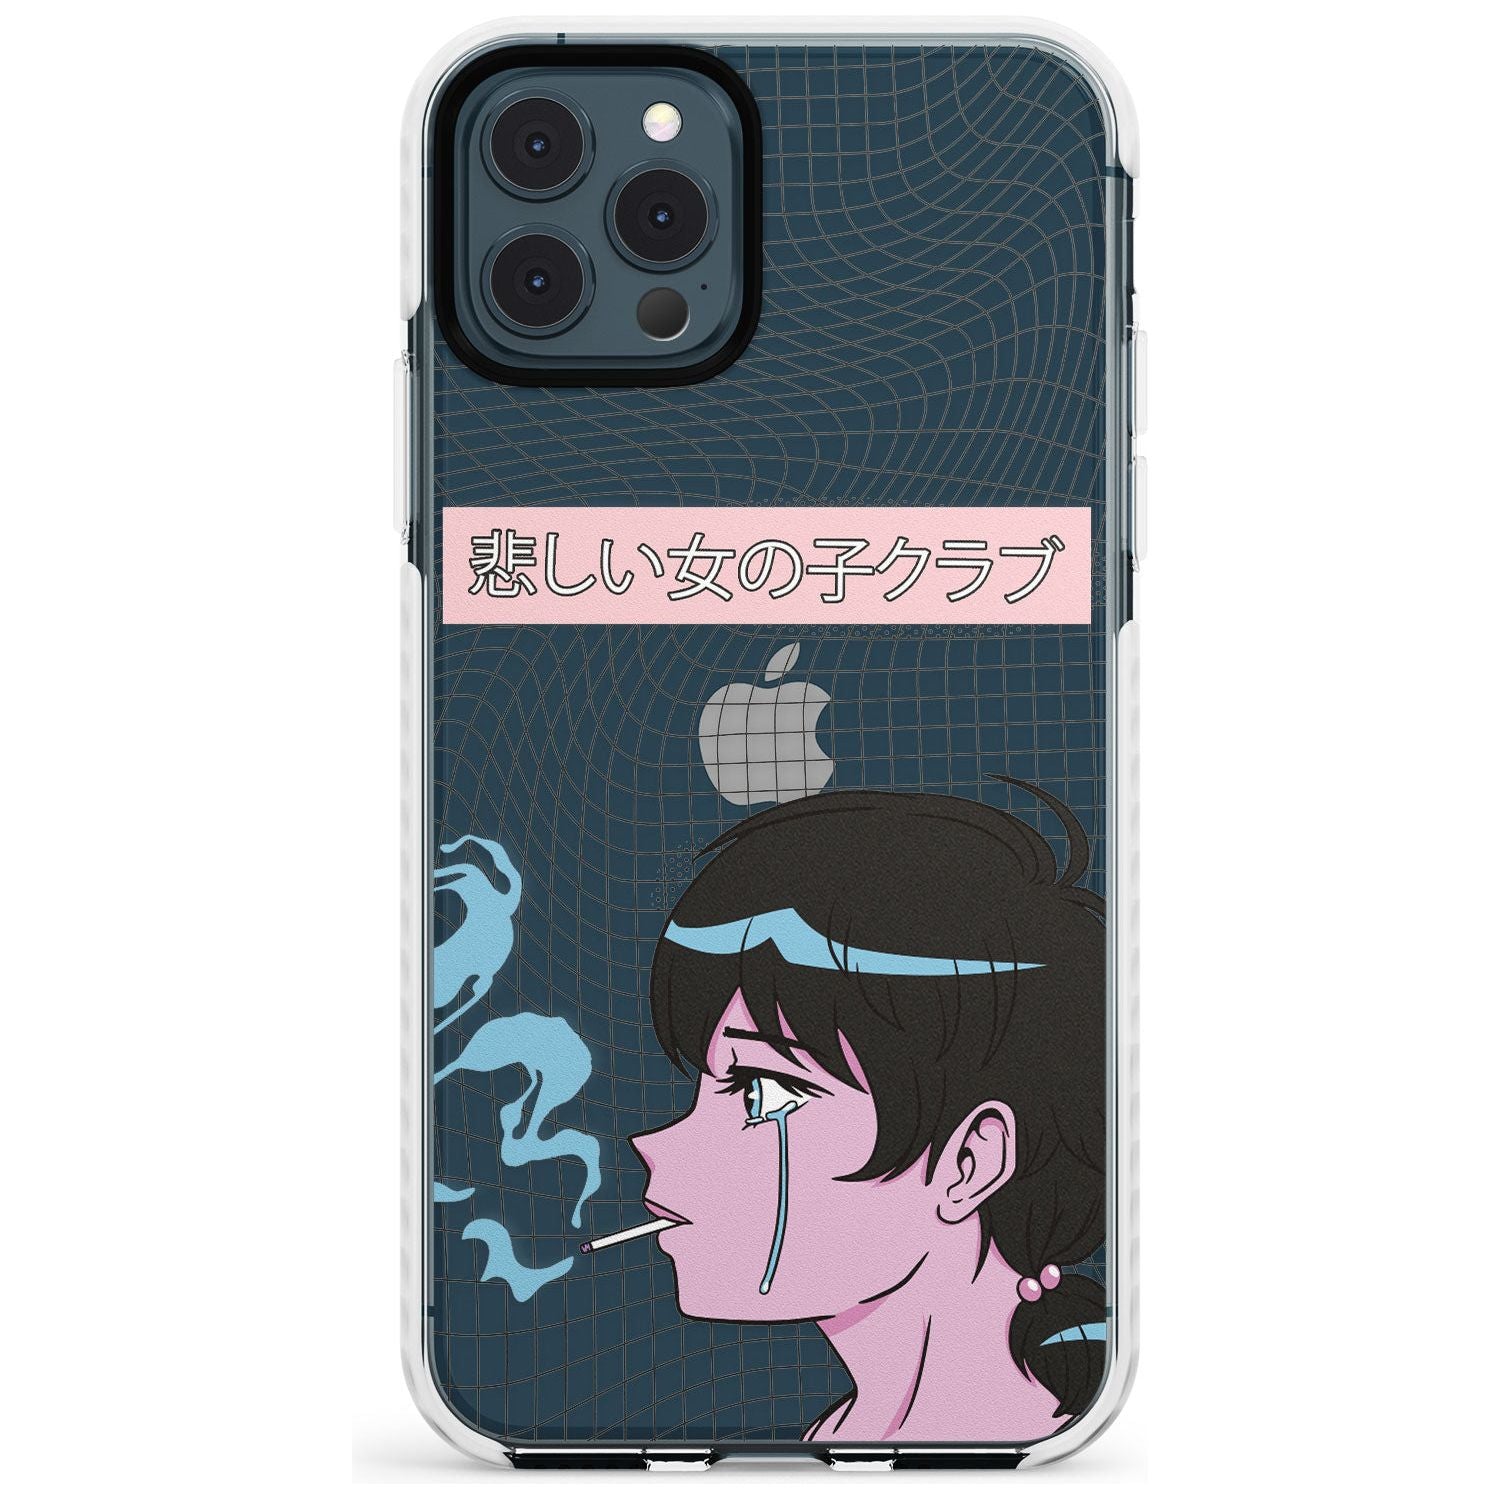 Lost Love Impact Phone Case for iPhone 11 Pro Max